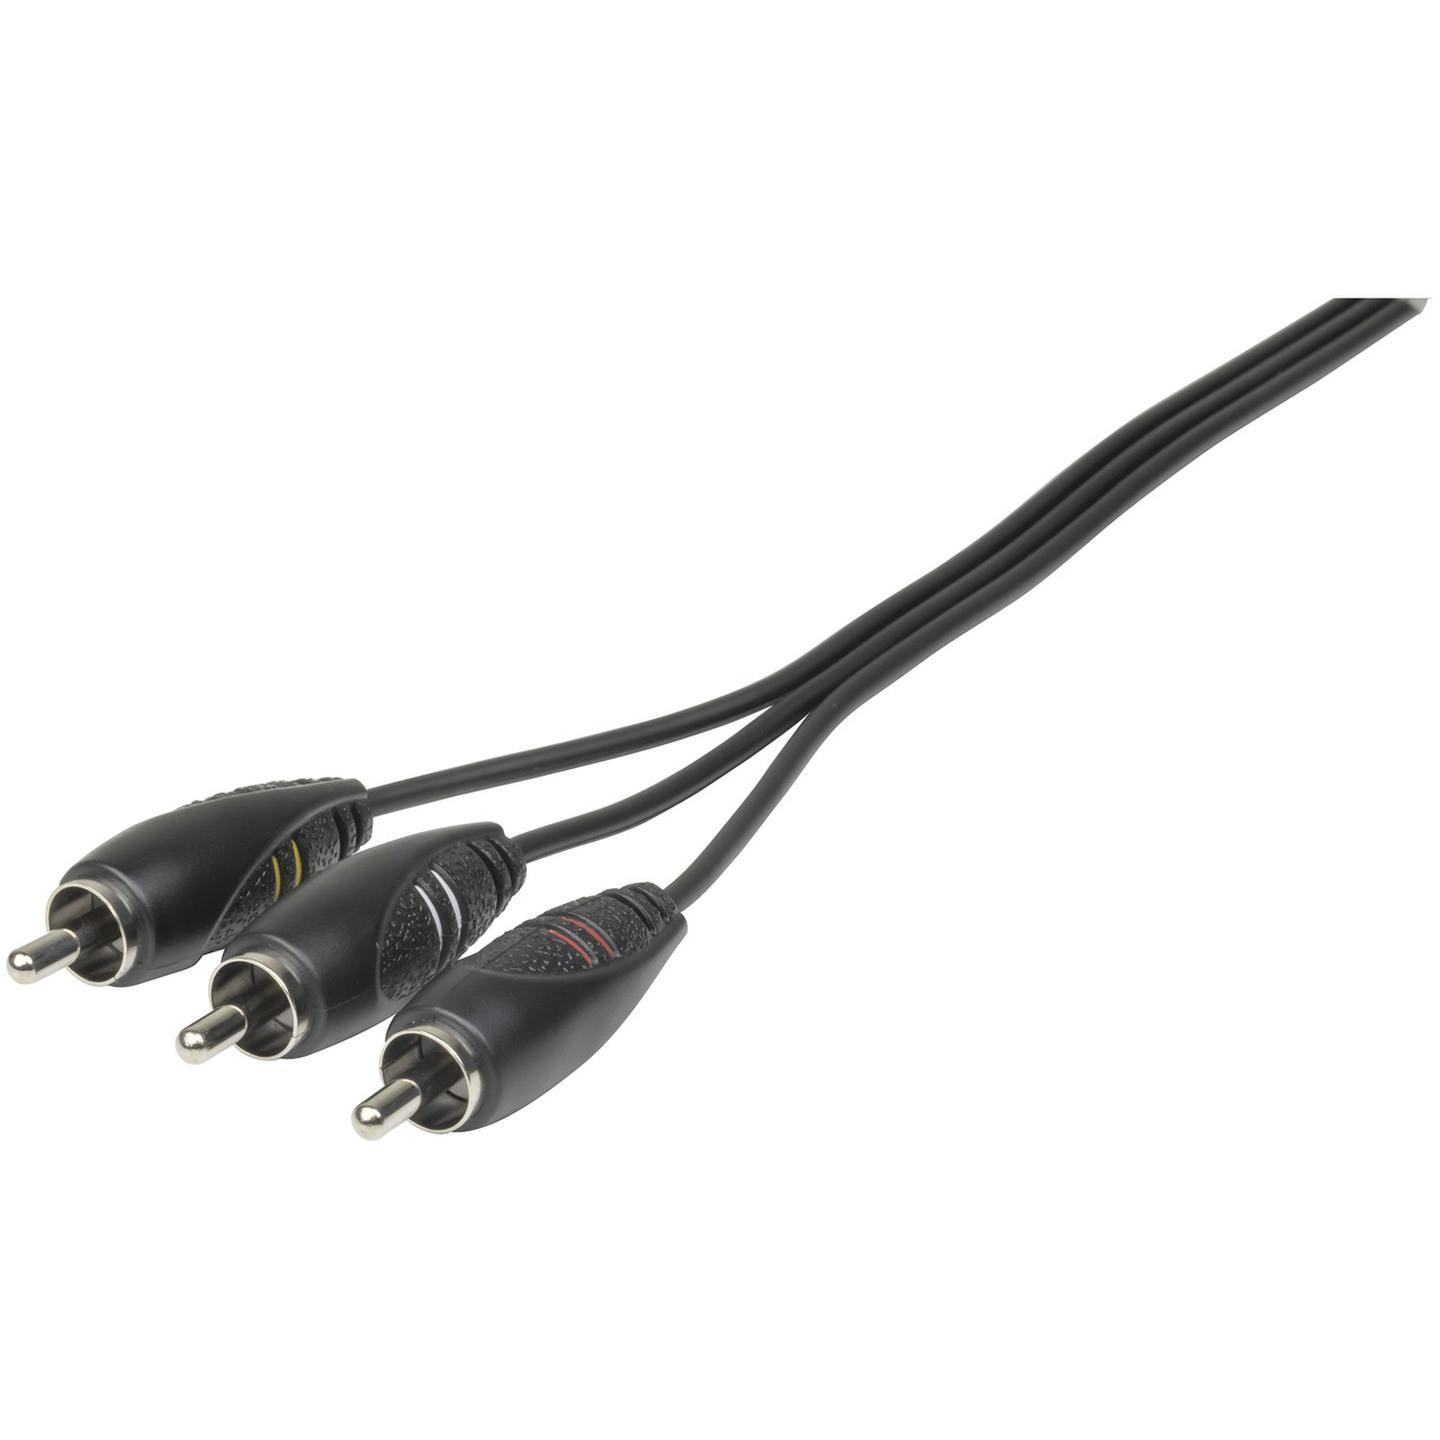 3 x RCA Plugs to 4 Pin 3.5mm AV Cable - 1.5m